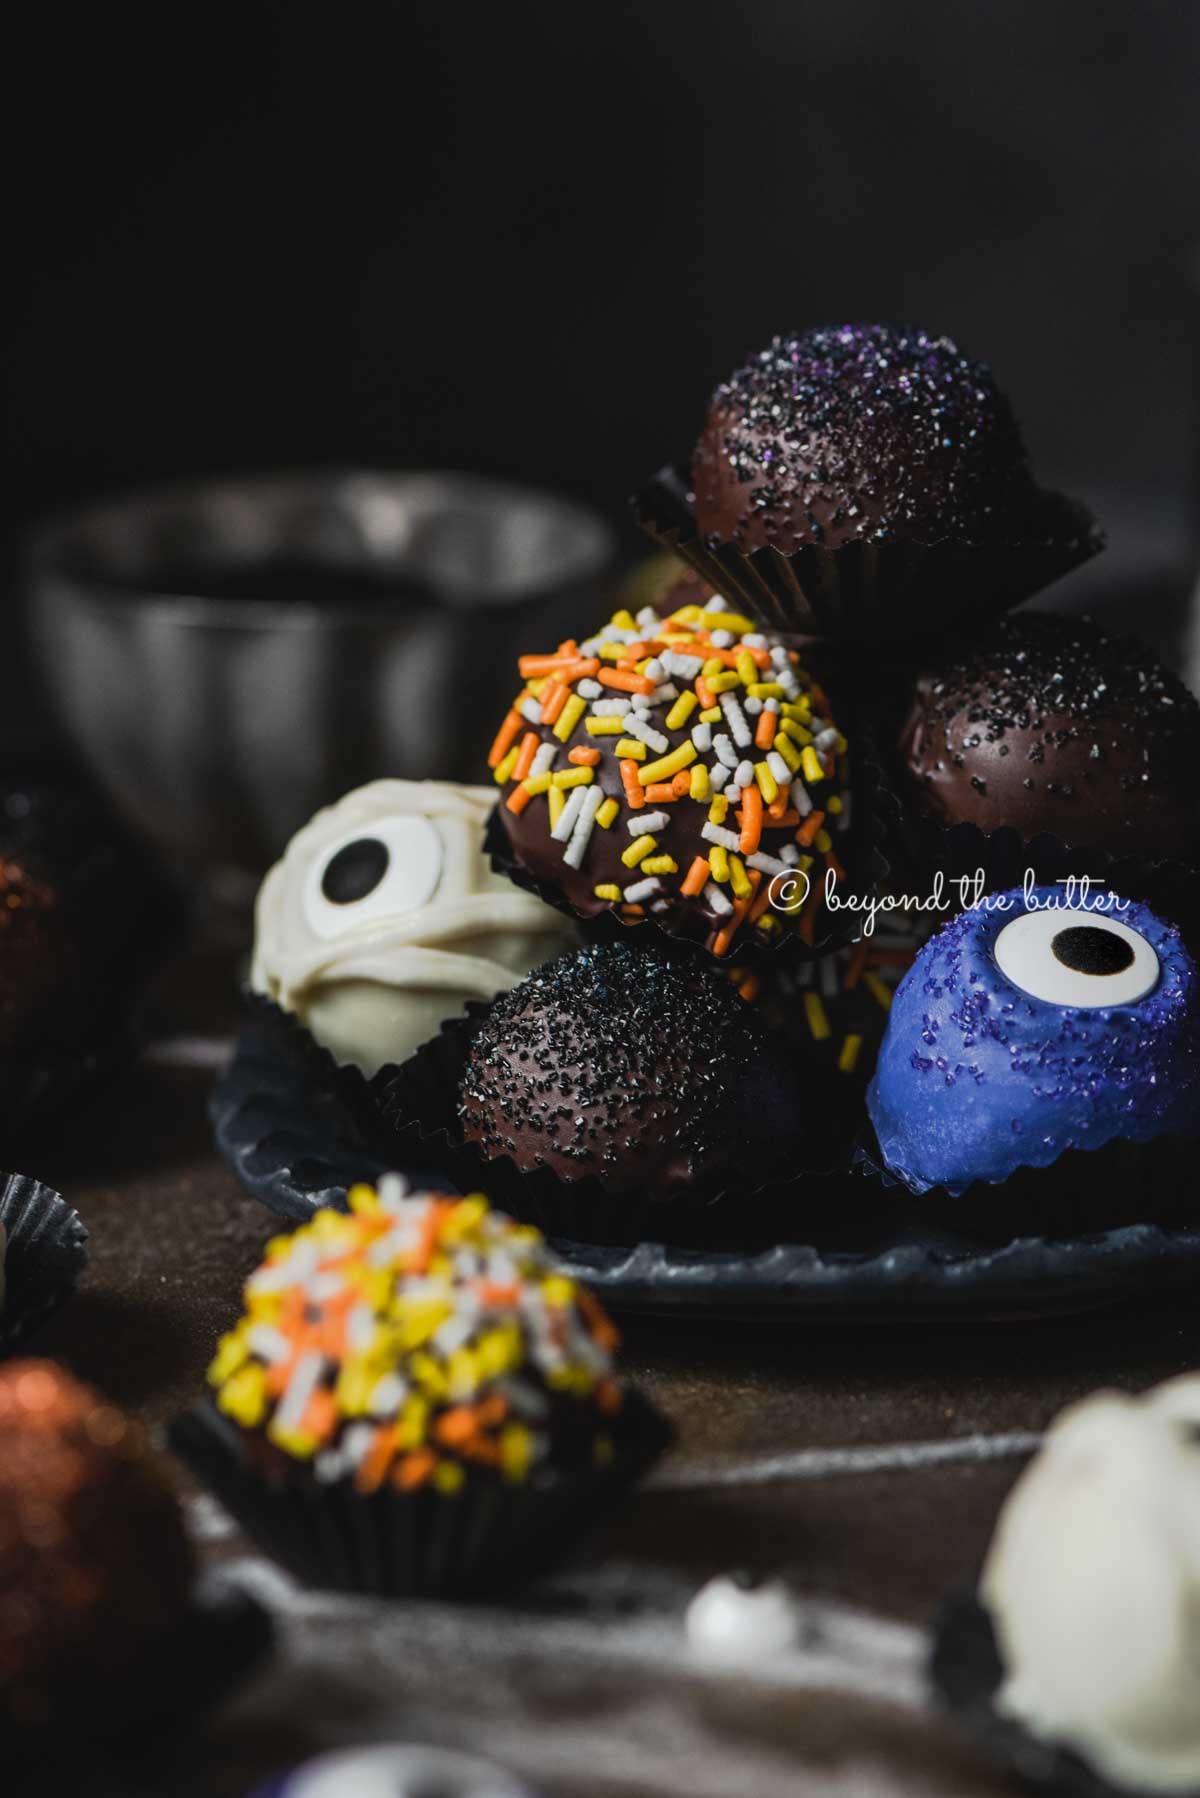 Plate of stacked homemade chocolate truffles with more around it on dark background.